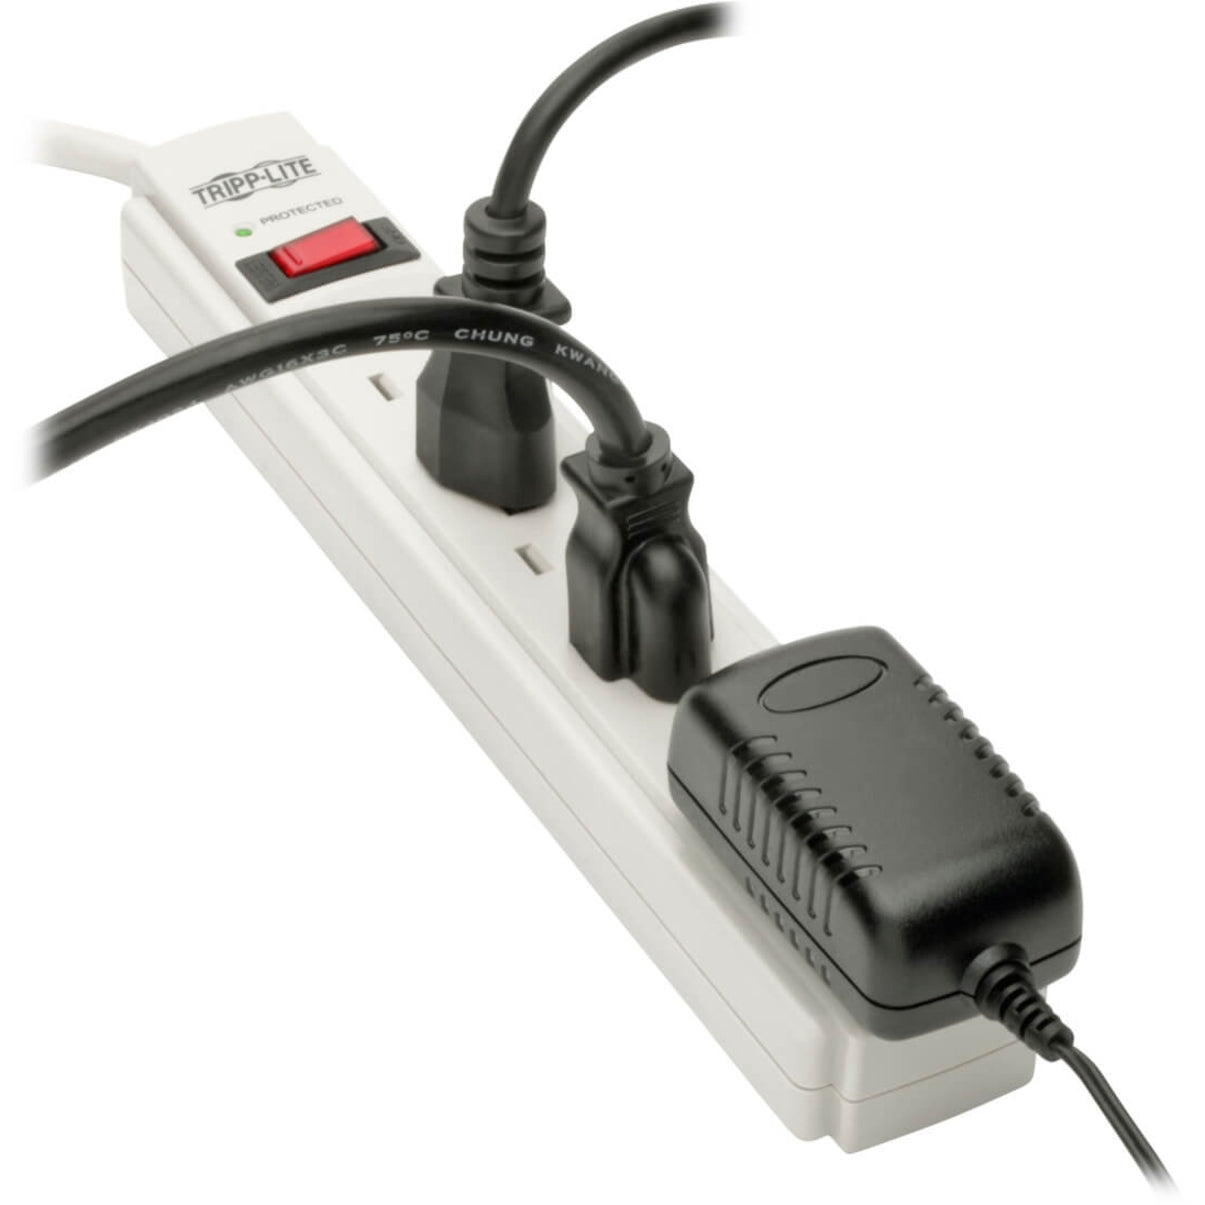 Tripp Lite TLP606TAA 6-Outlet Surge Protector, TAA Compliant, 1800W Power Rating, 790J Surge Energy Rating